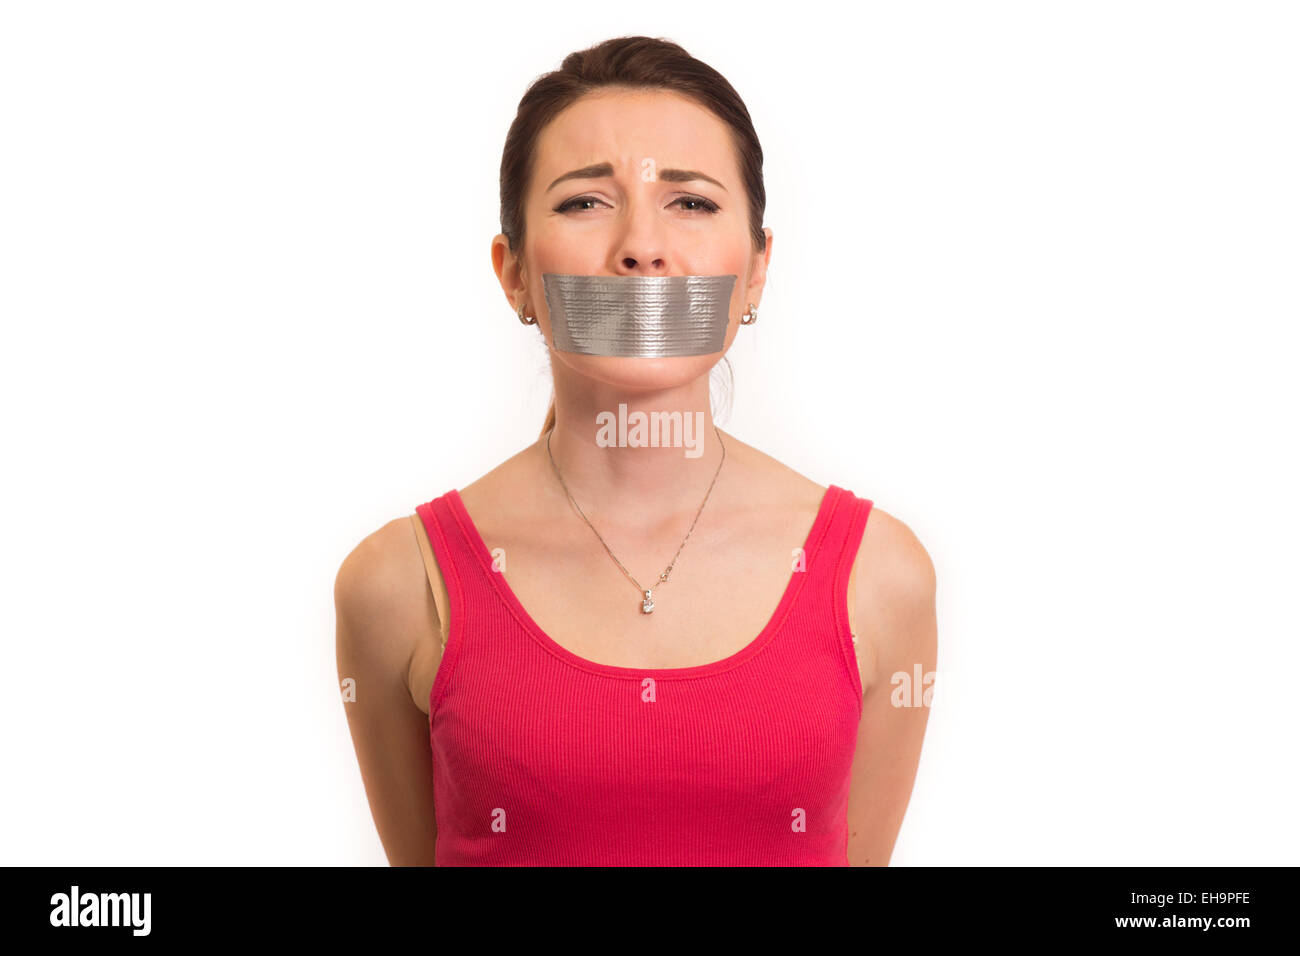 abused woman in red with gaffer tape on her mouth experiencing emotional pain isolated Stock Photo